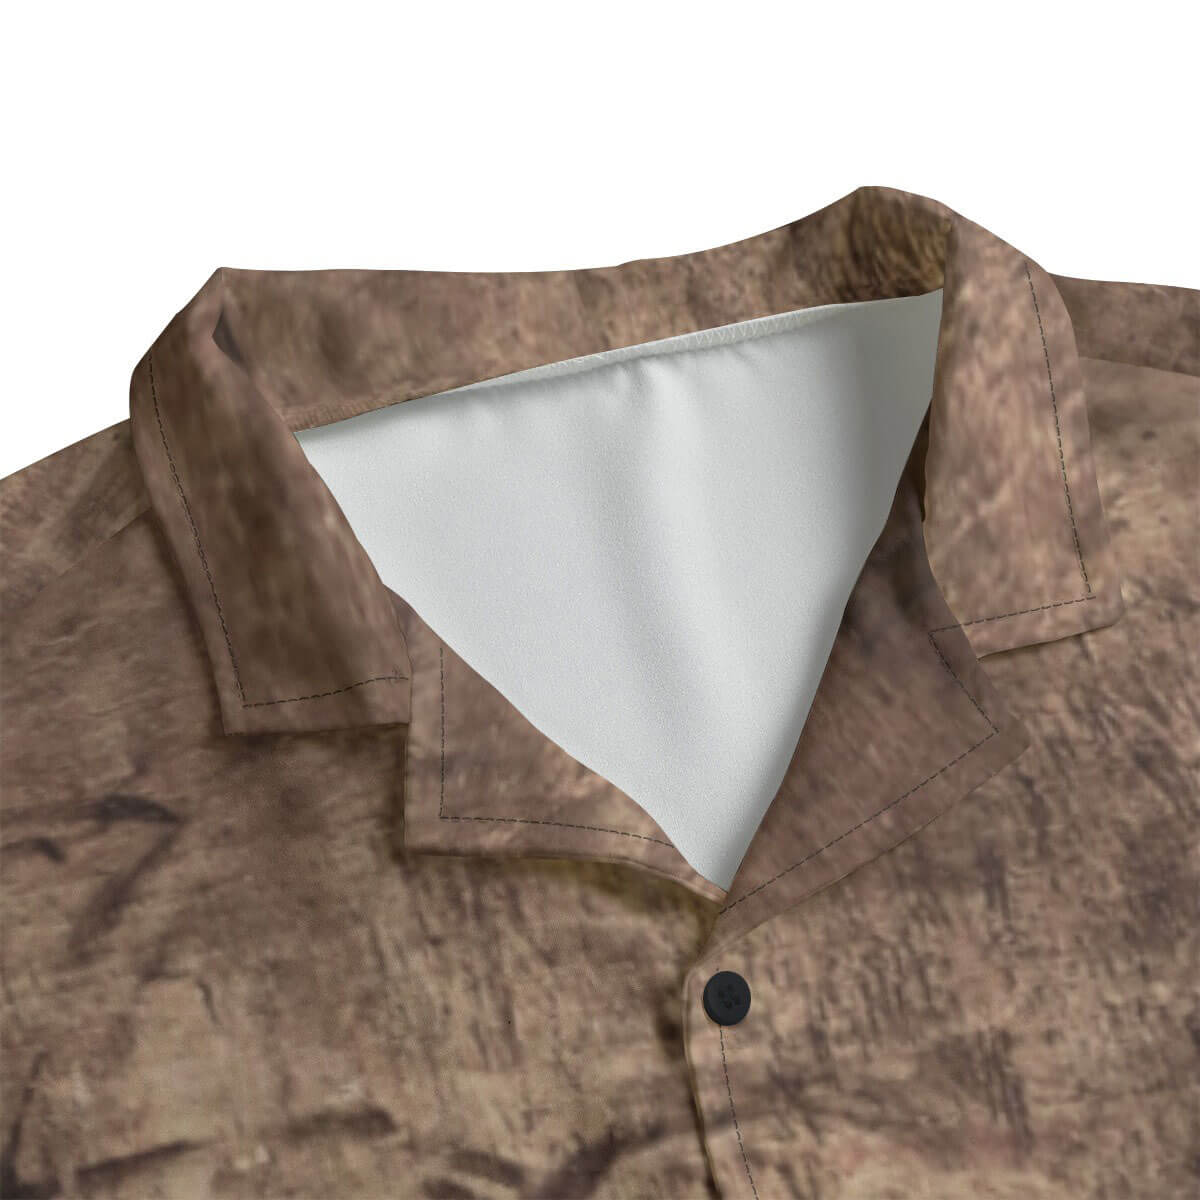 Leonardo's Head of a Woman Shirt paired with casual outfit for stylish art lover look